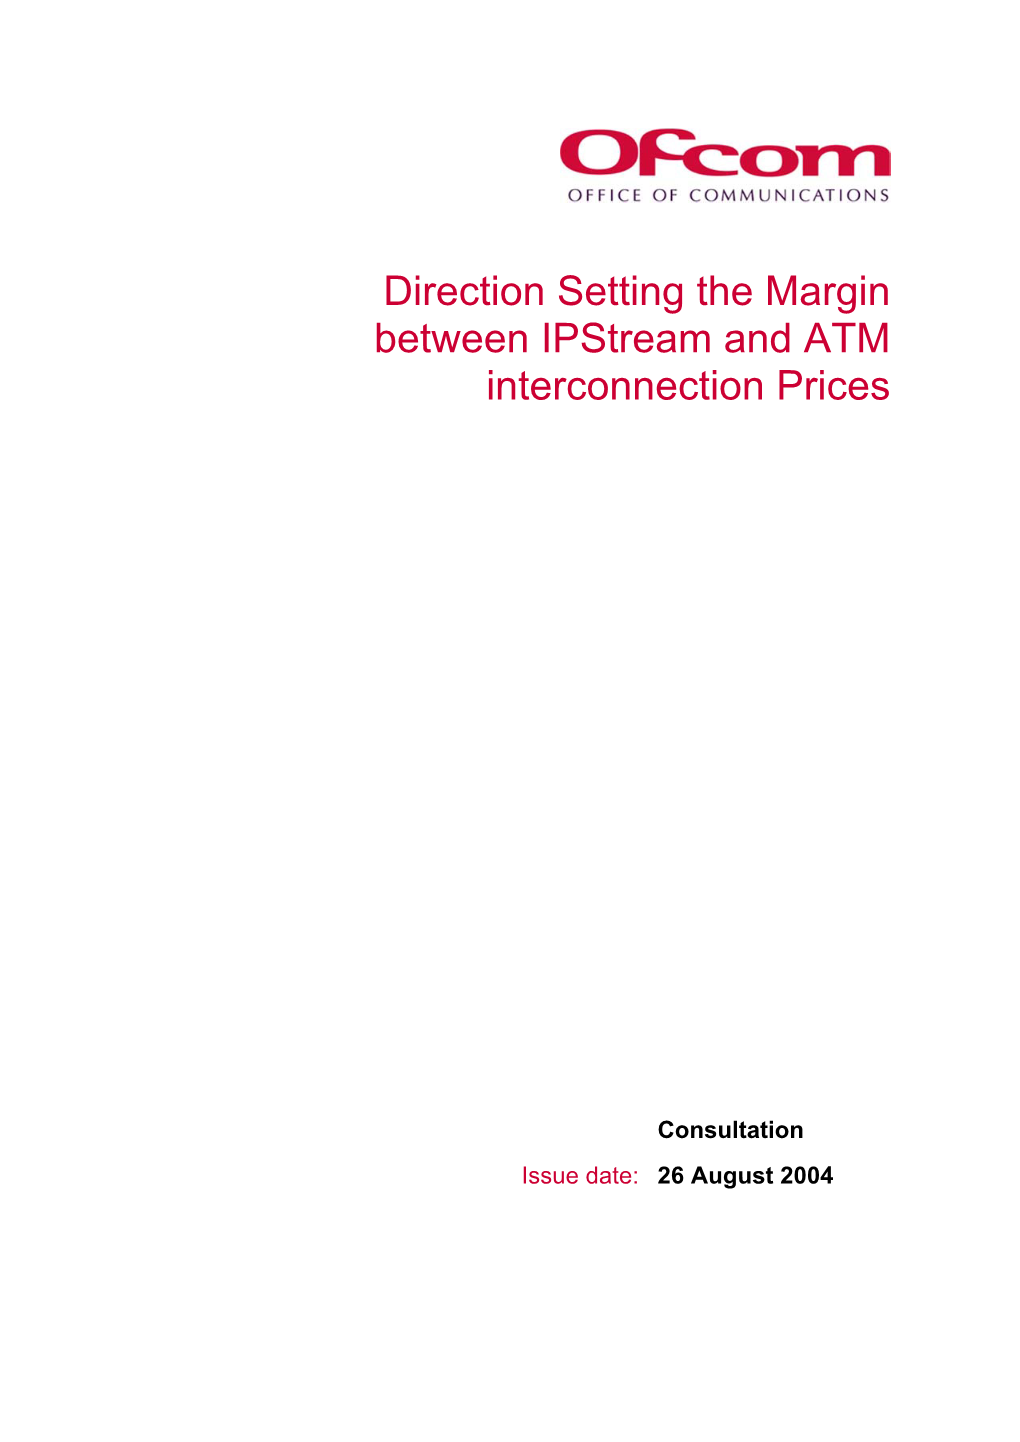 Direction Setting the Margin Between Ipstream and ATM Interconnection Prices